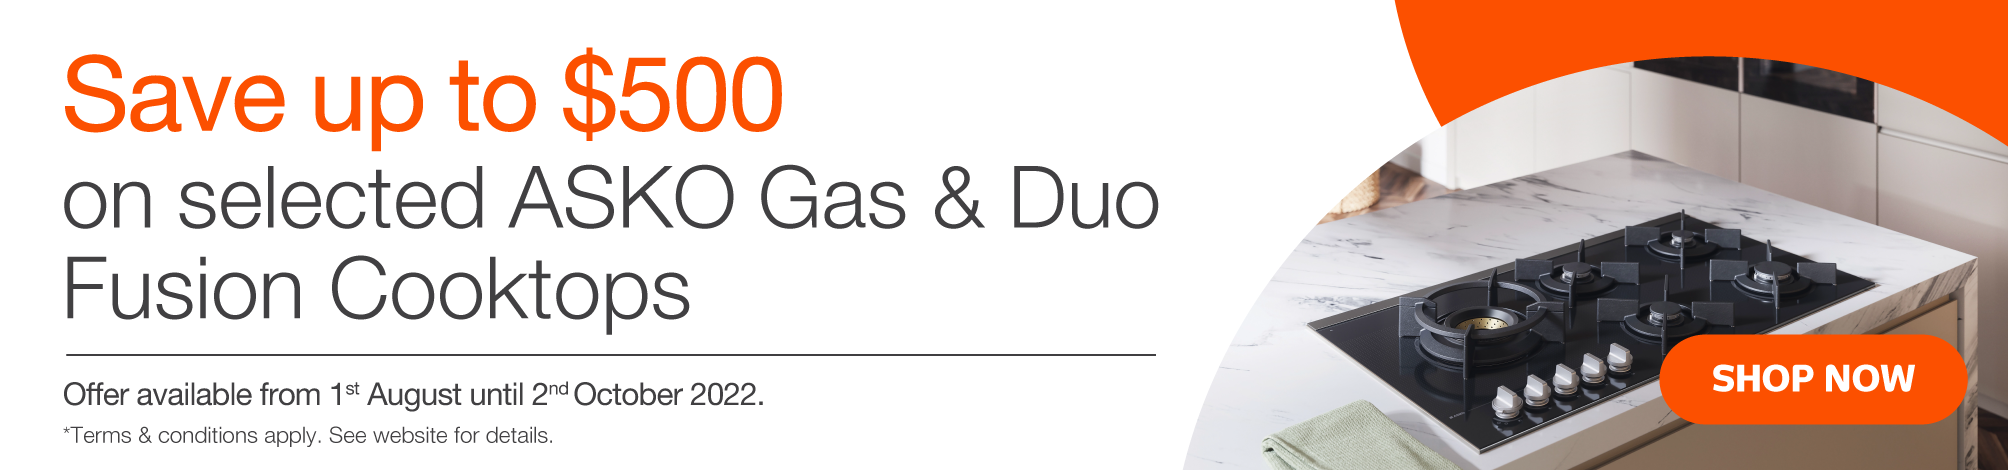 Save up to $500 on selected Asko Gas & Duo Fusion Cooktops